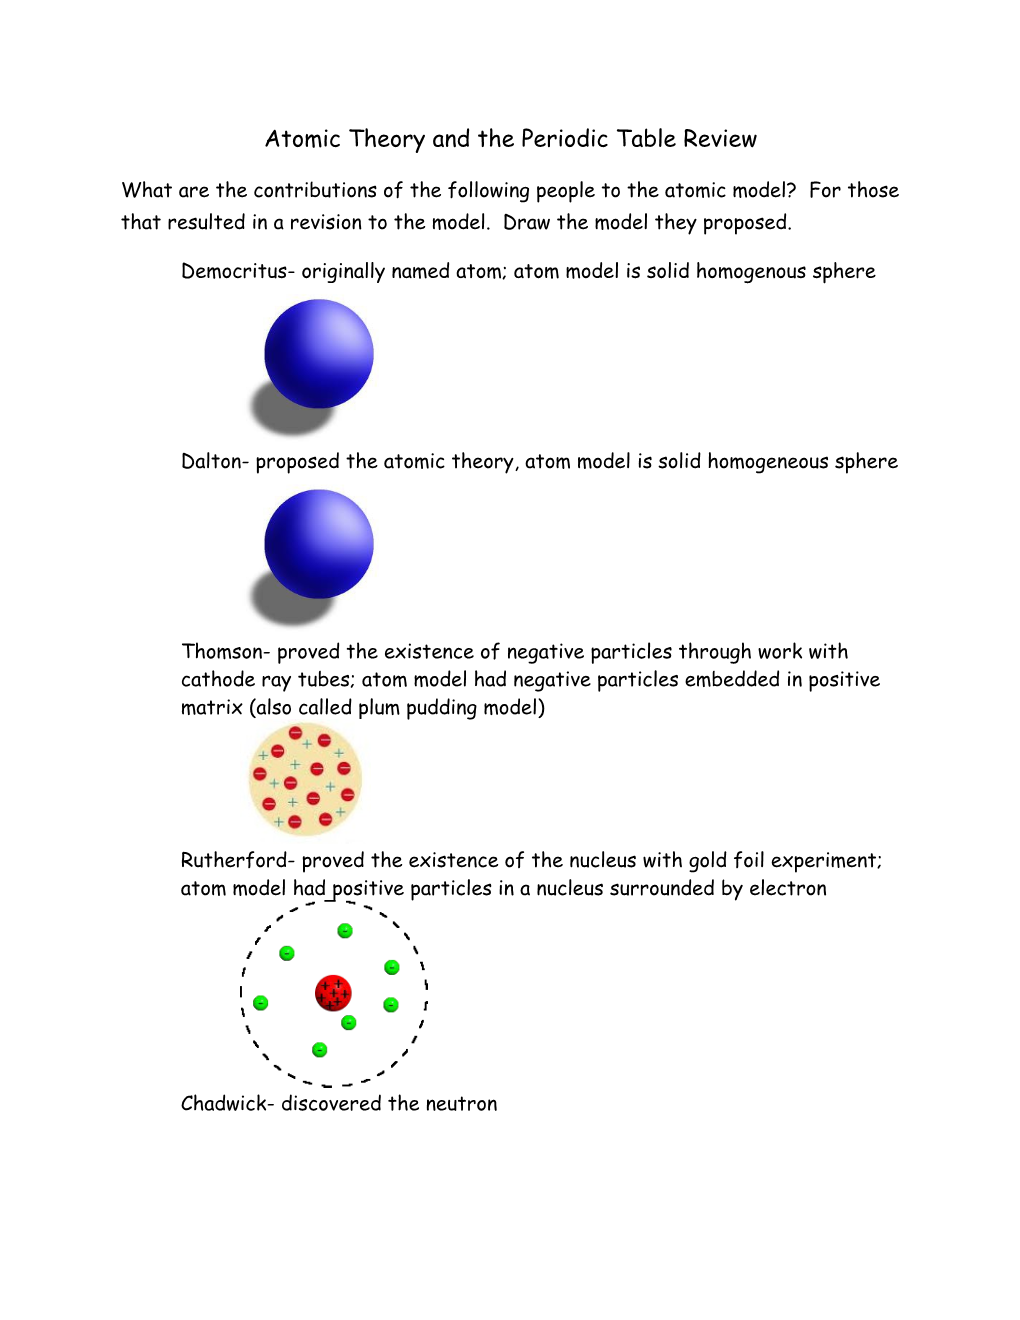 Atomic Theory and the Periodic Table Review